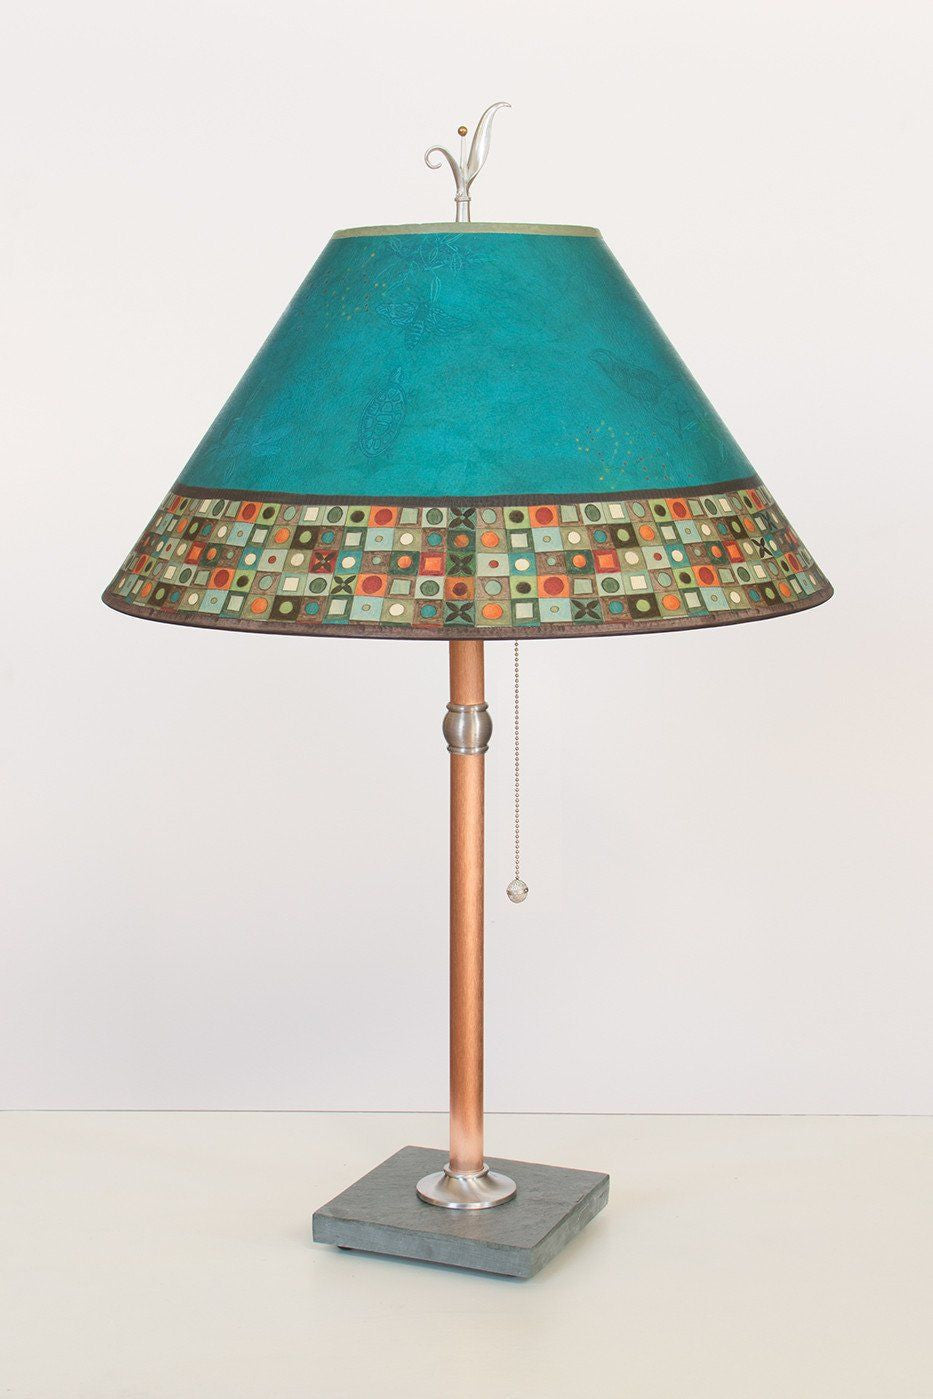 Janna Ugone & Co Table Lamps Copper Table Lamp with Large Conical Shade in Jade Mosaic